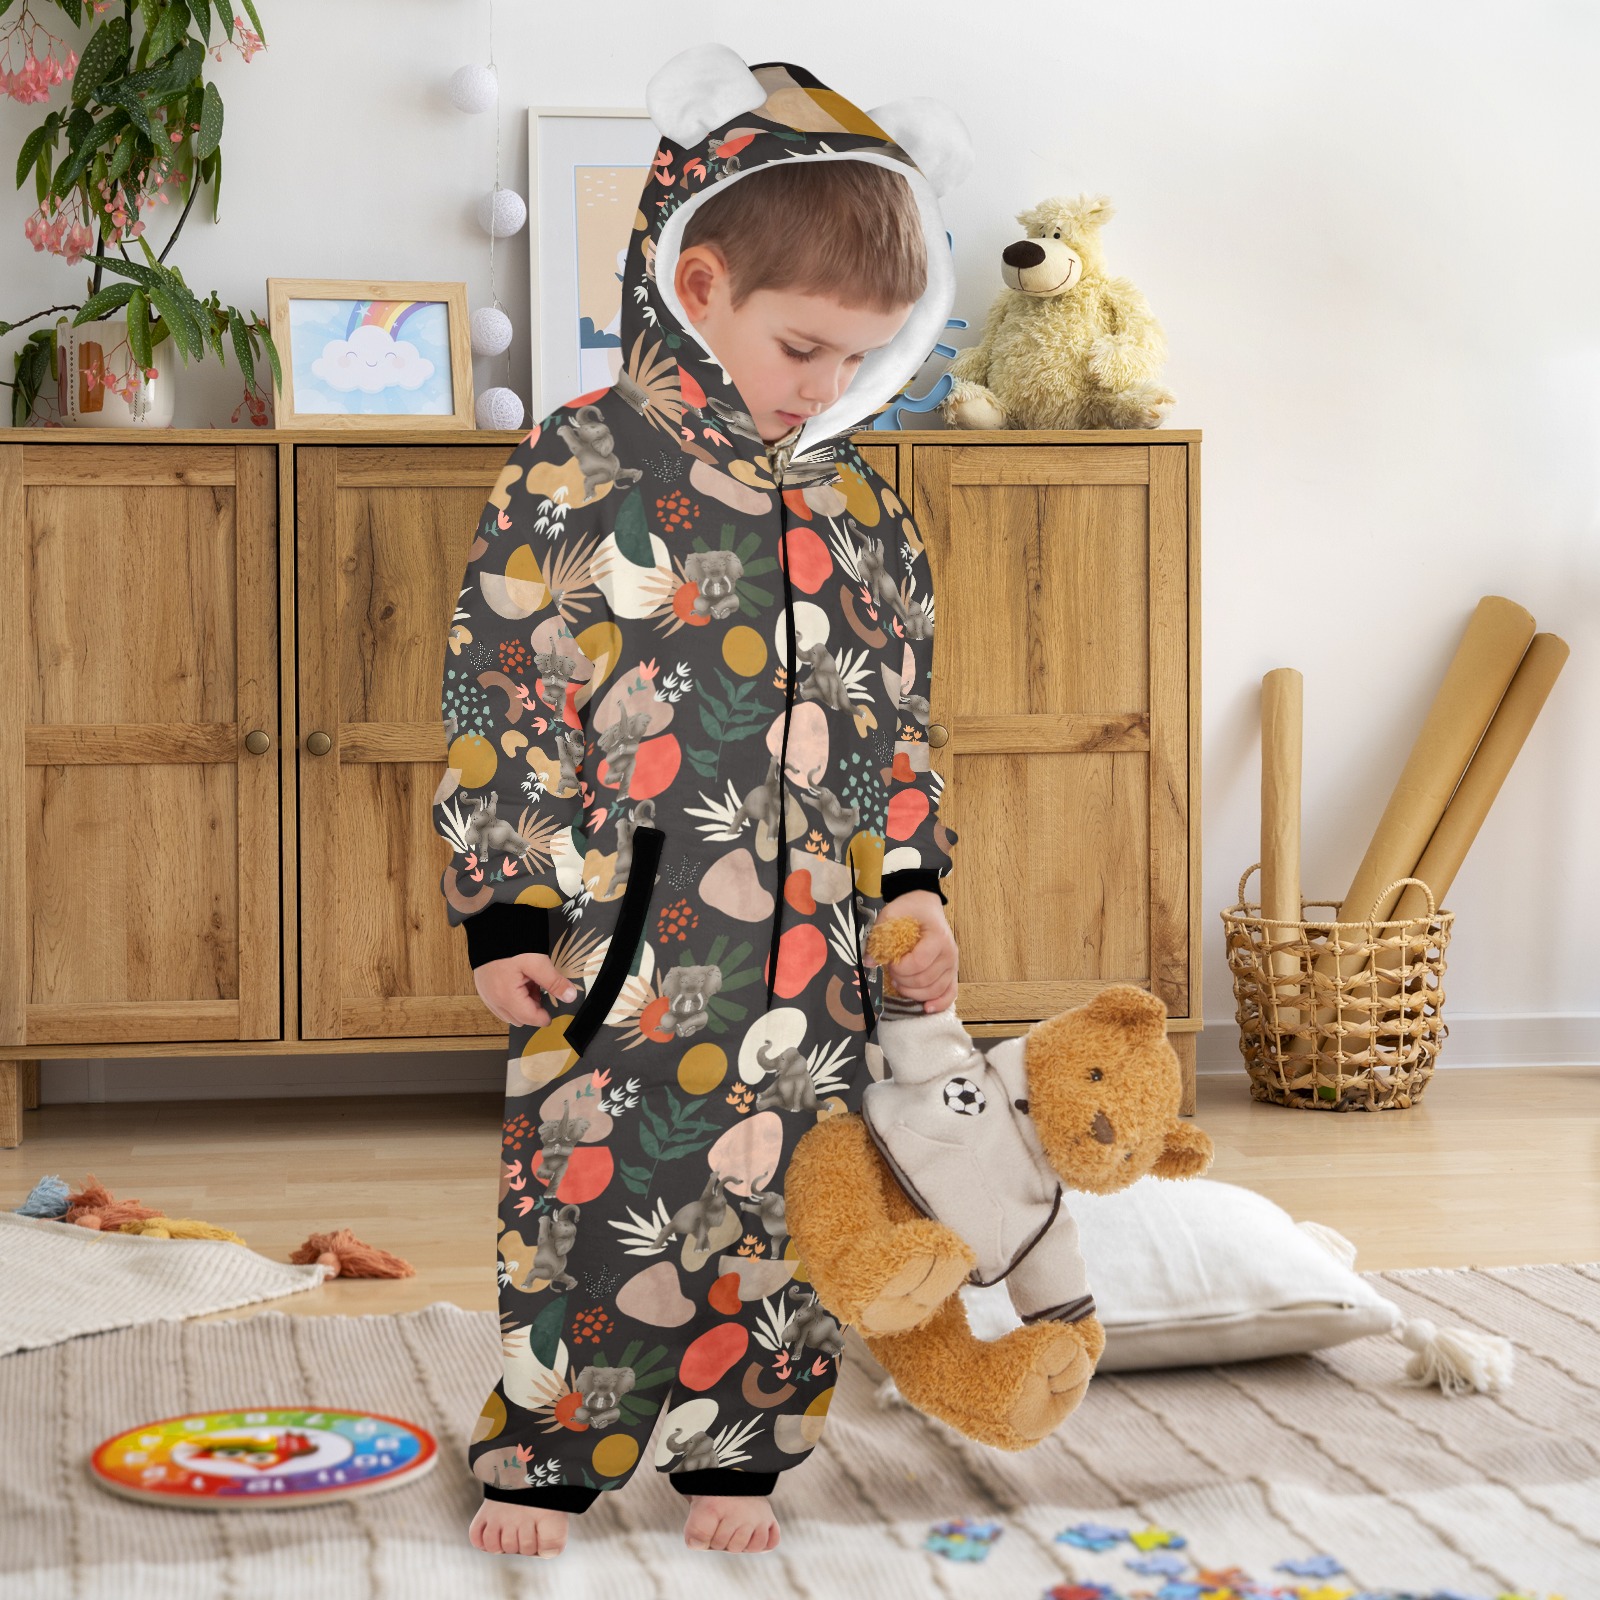 Elephant yoga in abstract nature 01 One-Piece Zip up Hooded Pajamas for Little Kids